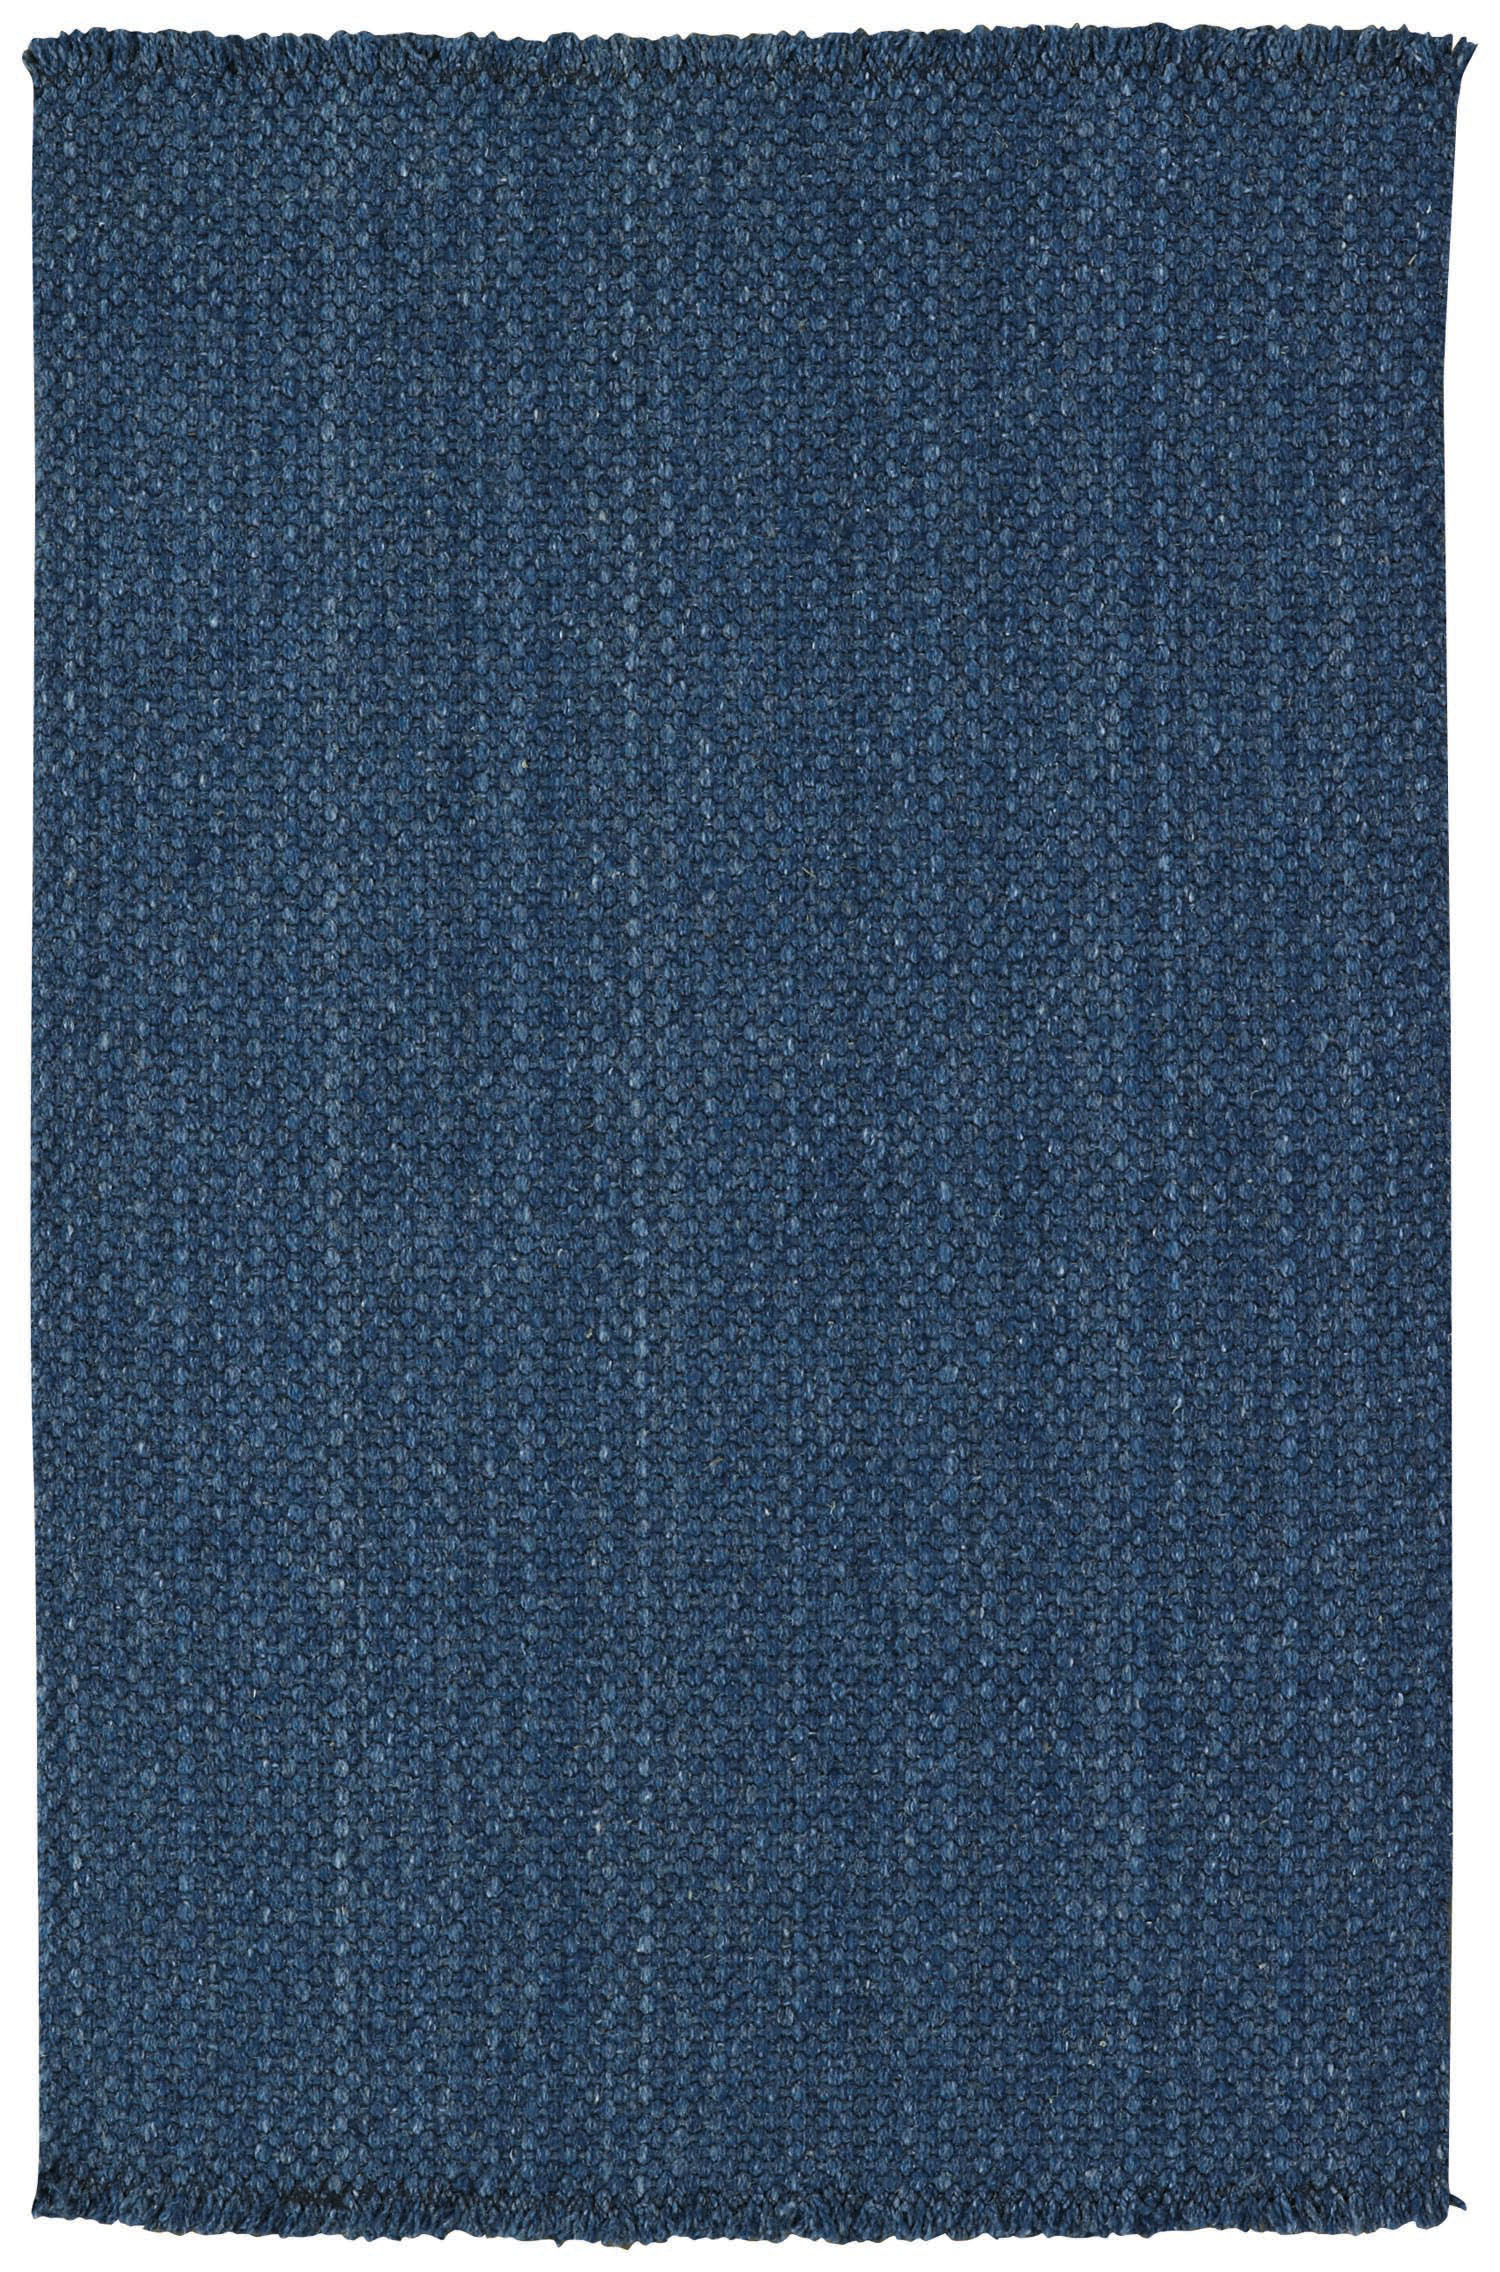 Capel Rugs - Nags Head Vertical Stripe Rectangle Flat Woven Rugs - image 1 of 3